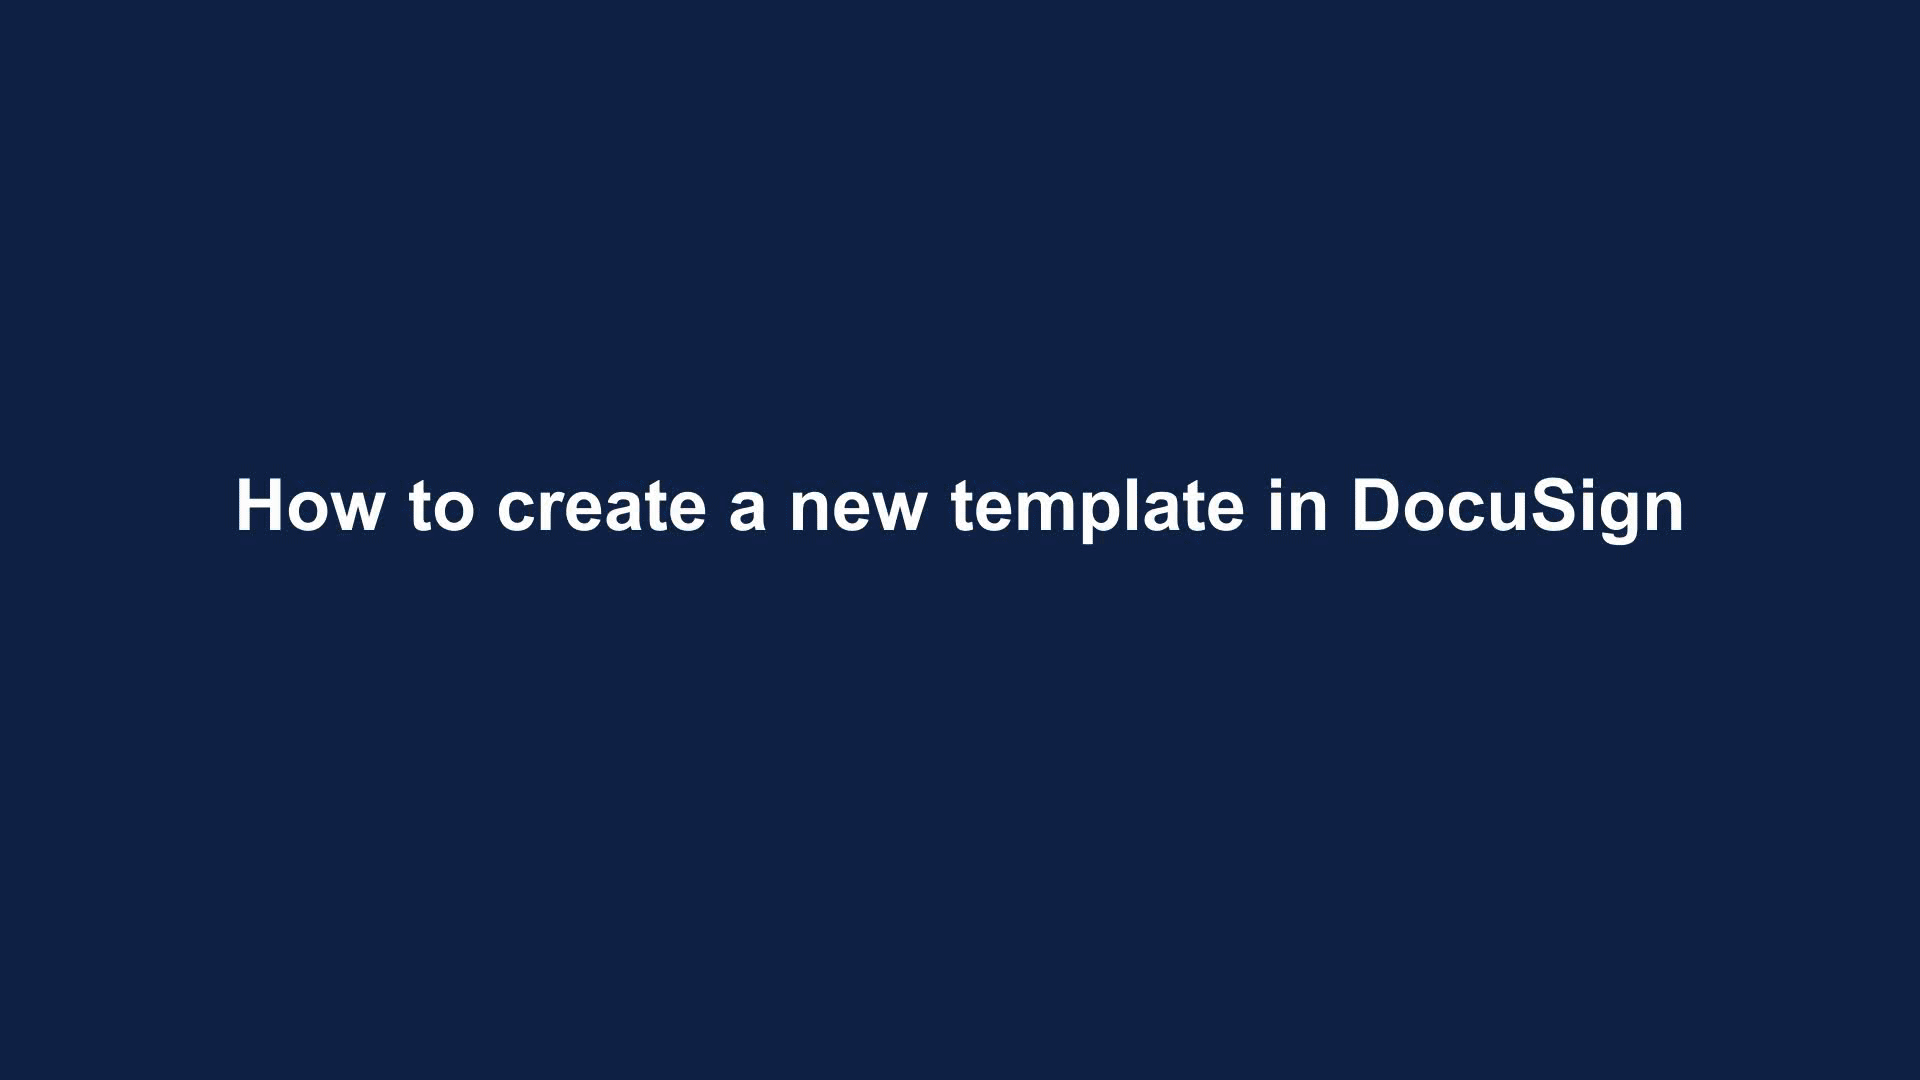 how-to-create-a-new-template-in-docusign-a-guide-by-myguide